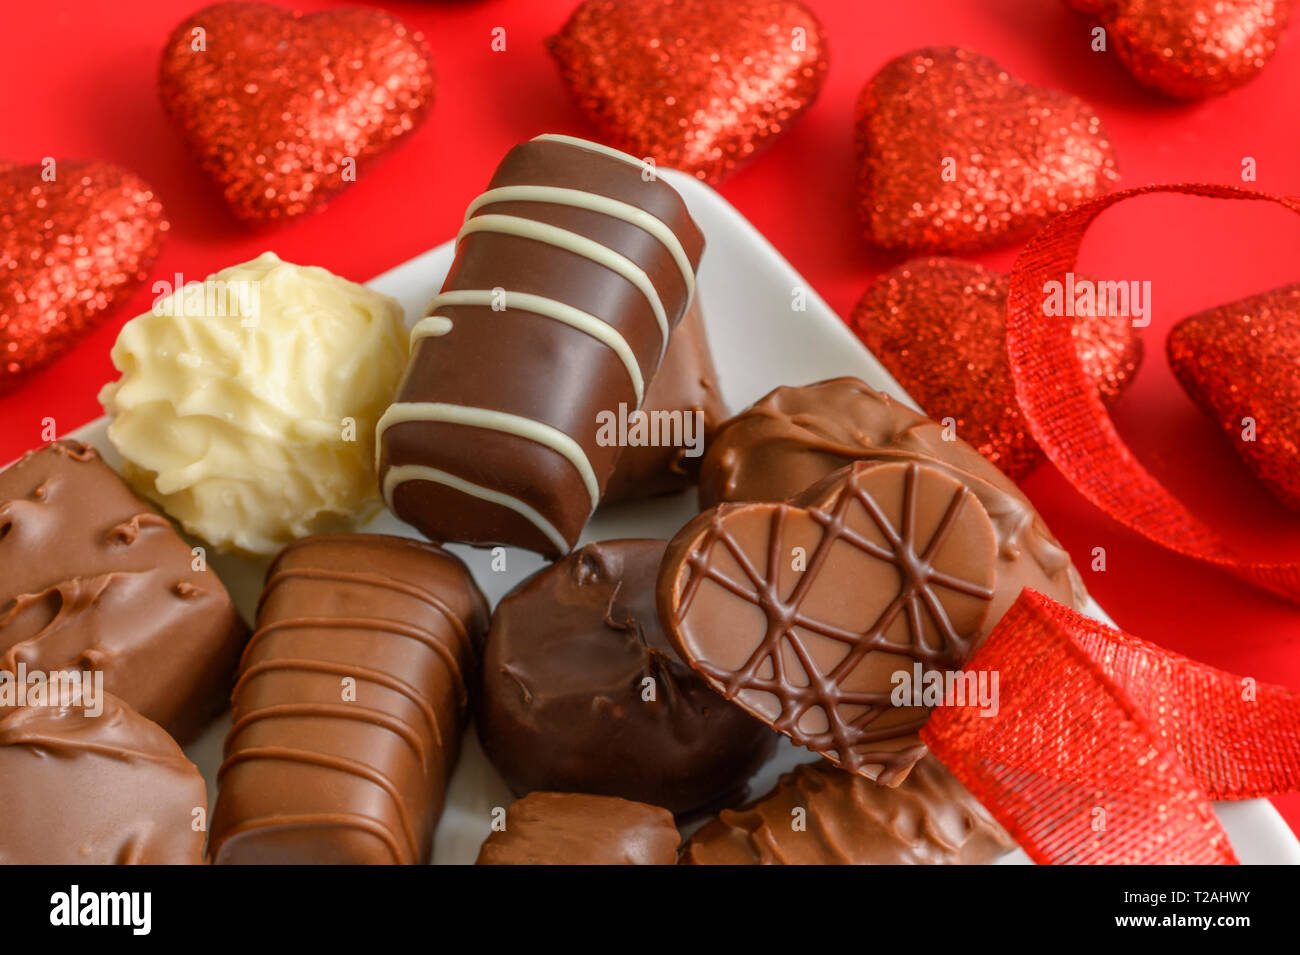 Assorted chocolates with red hearts Stock Photo